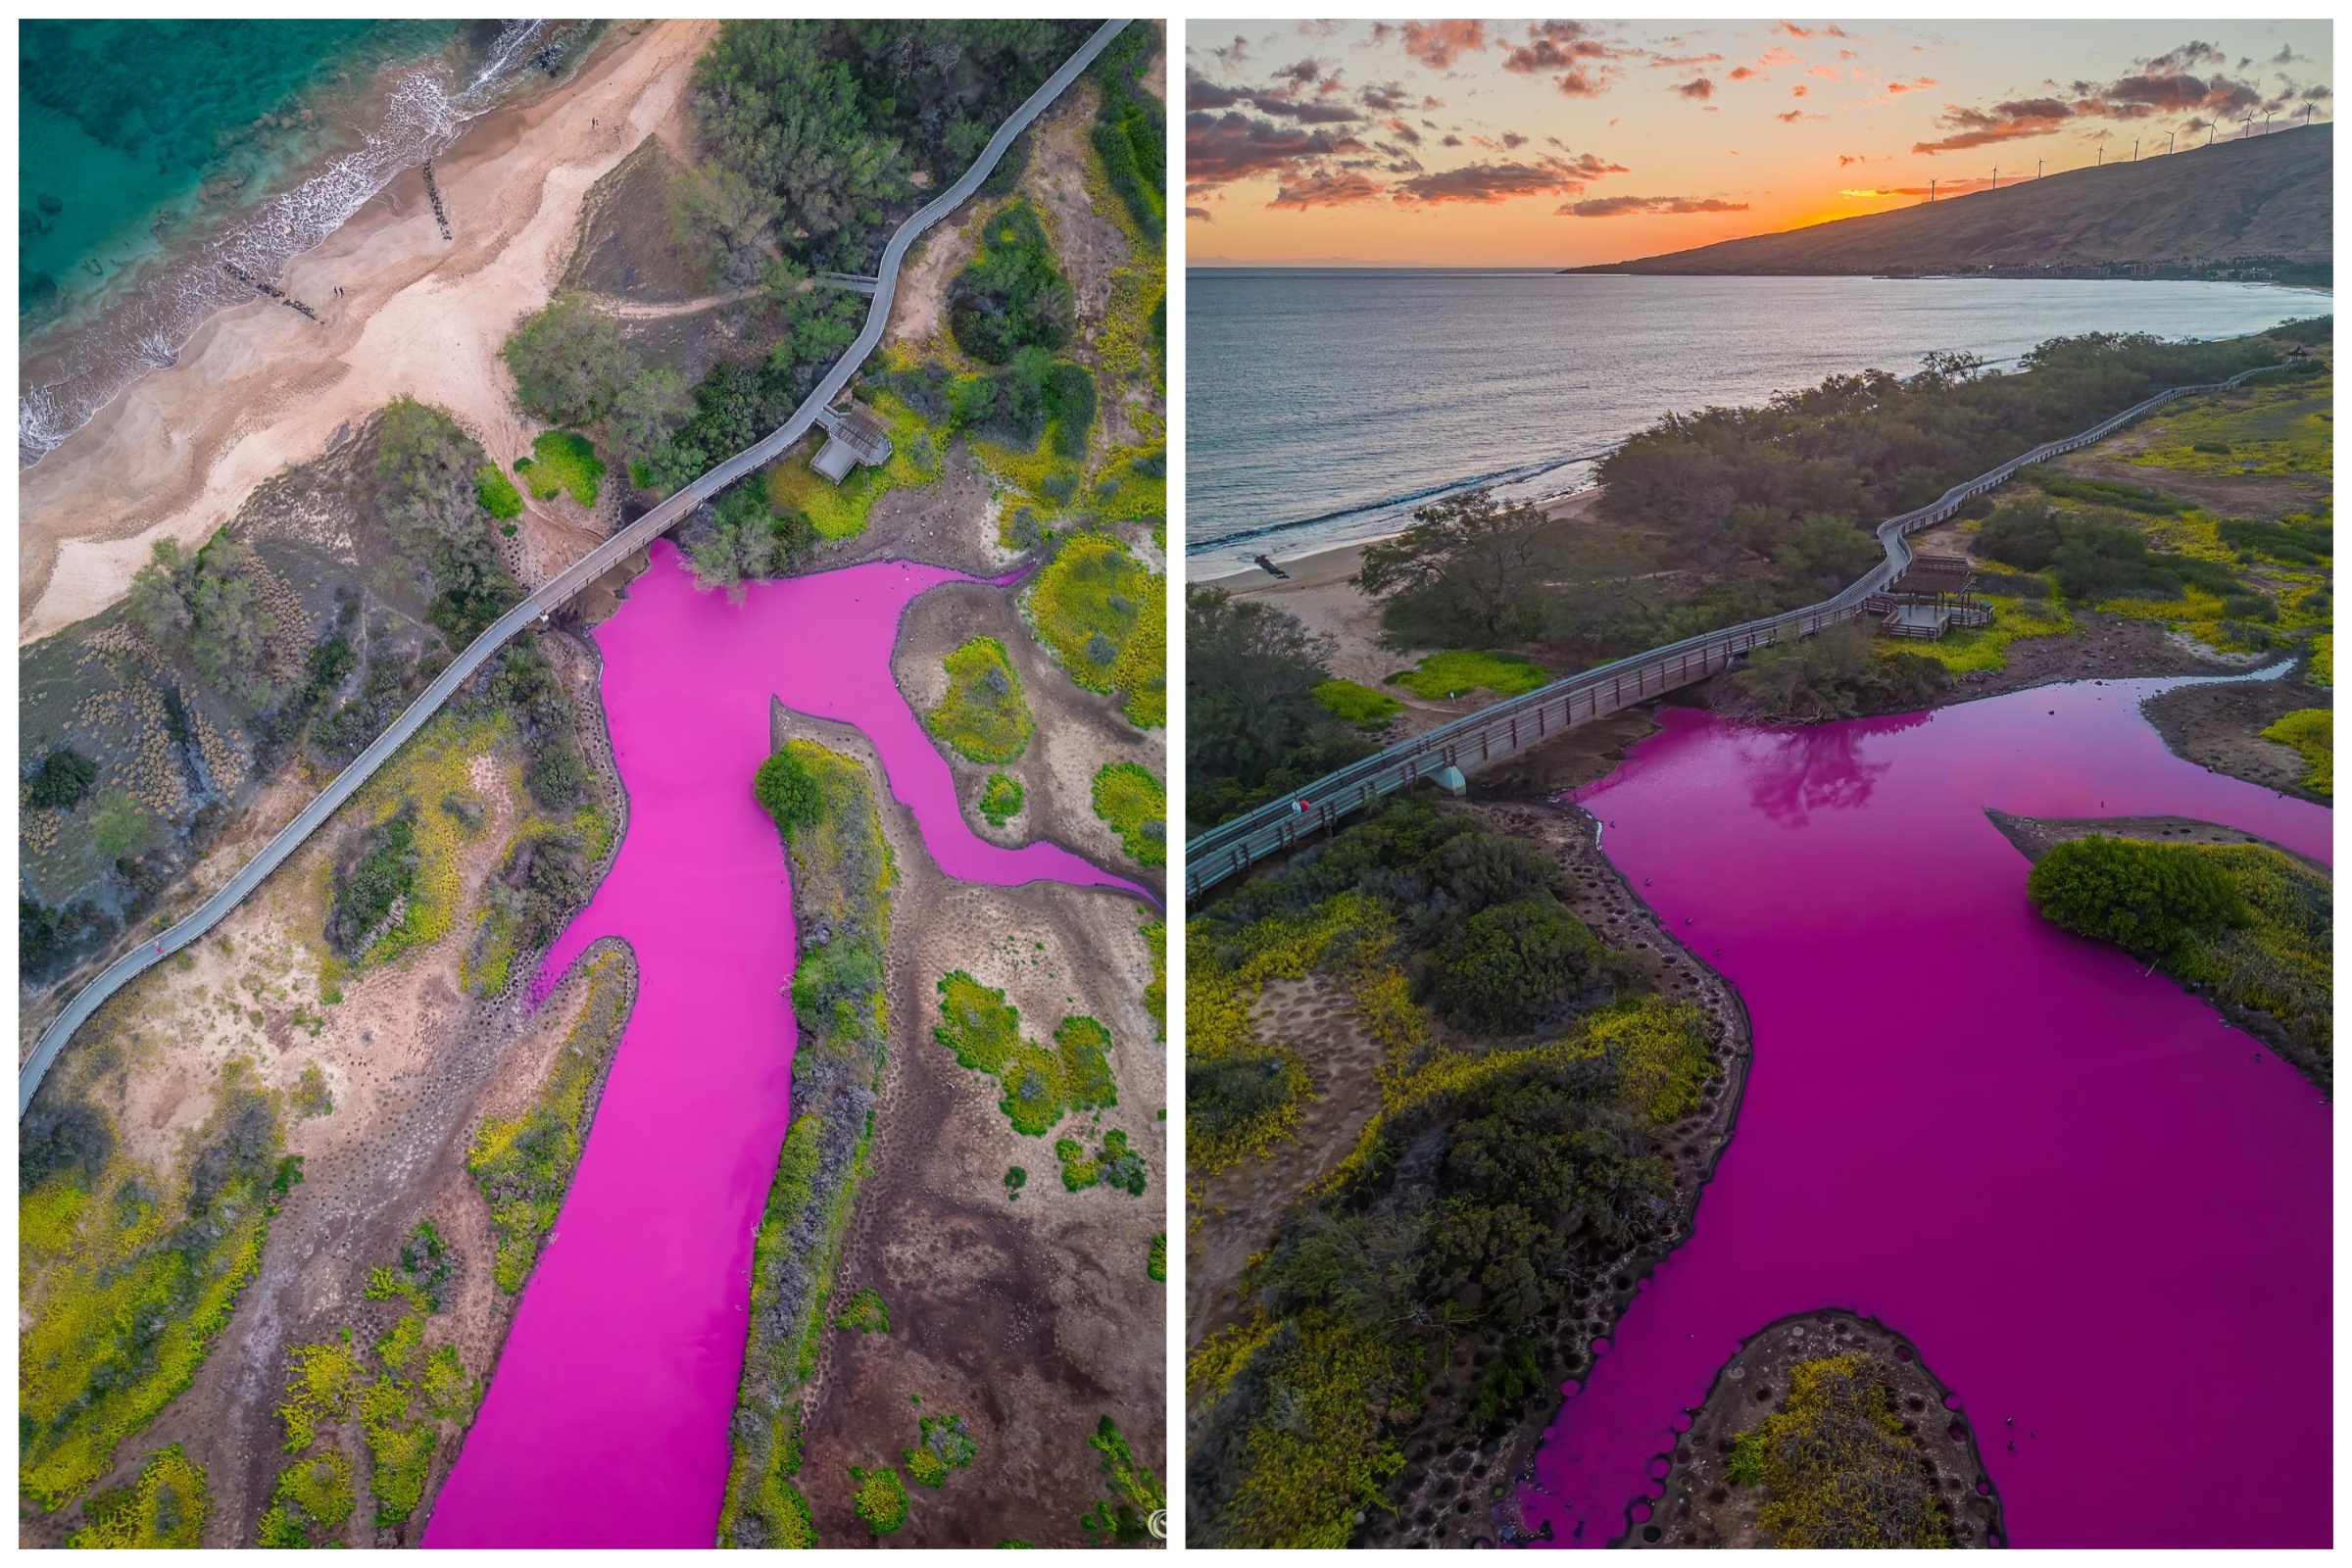 Unbelievable Photographs of a Pond Turned Vibrant Pink Are a Warning